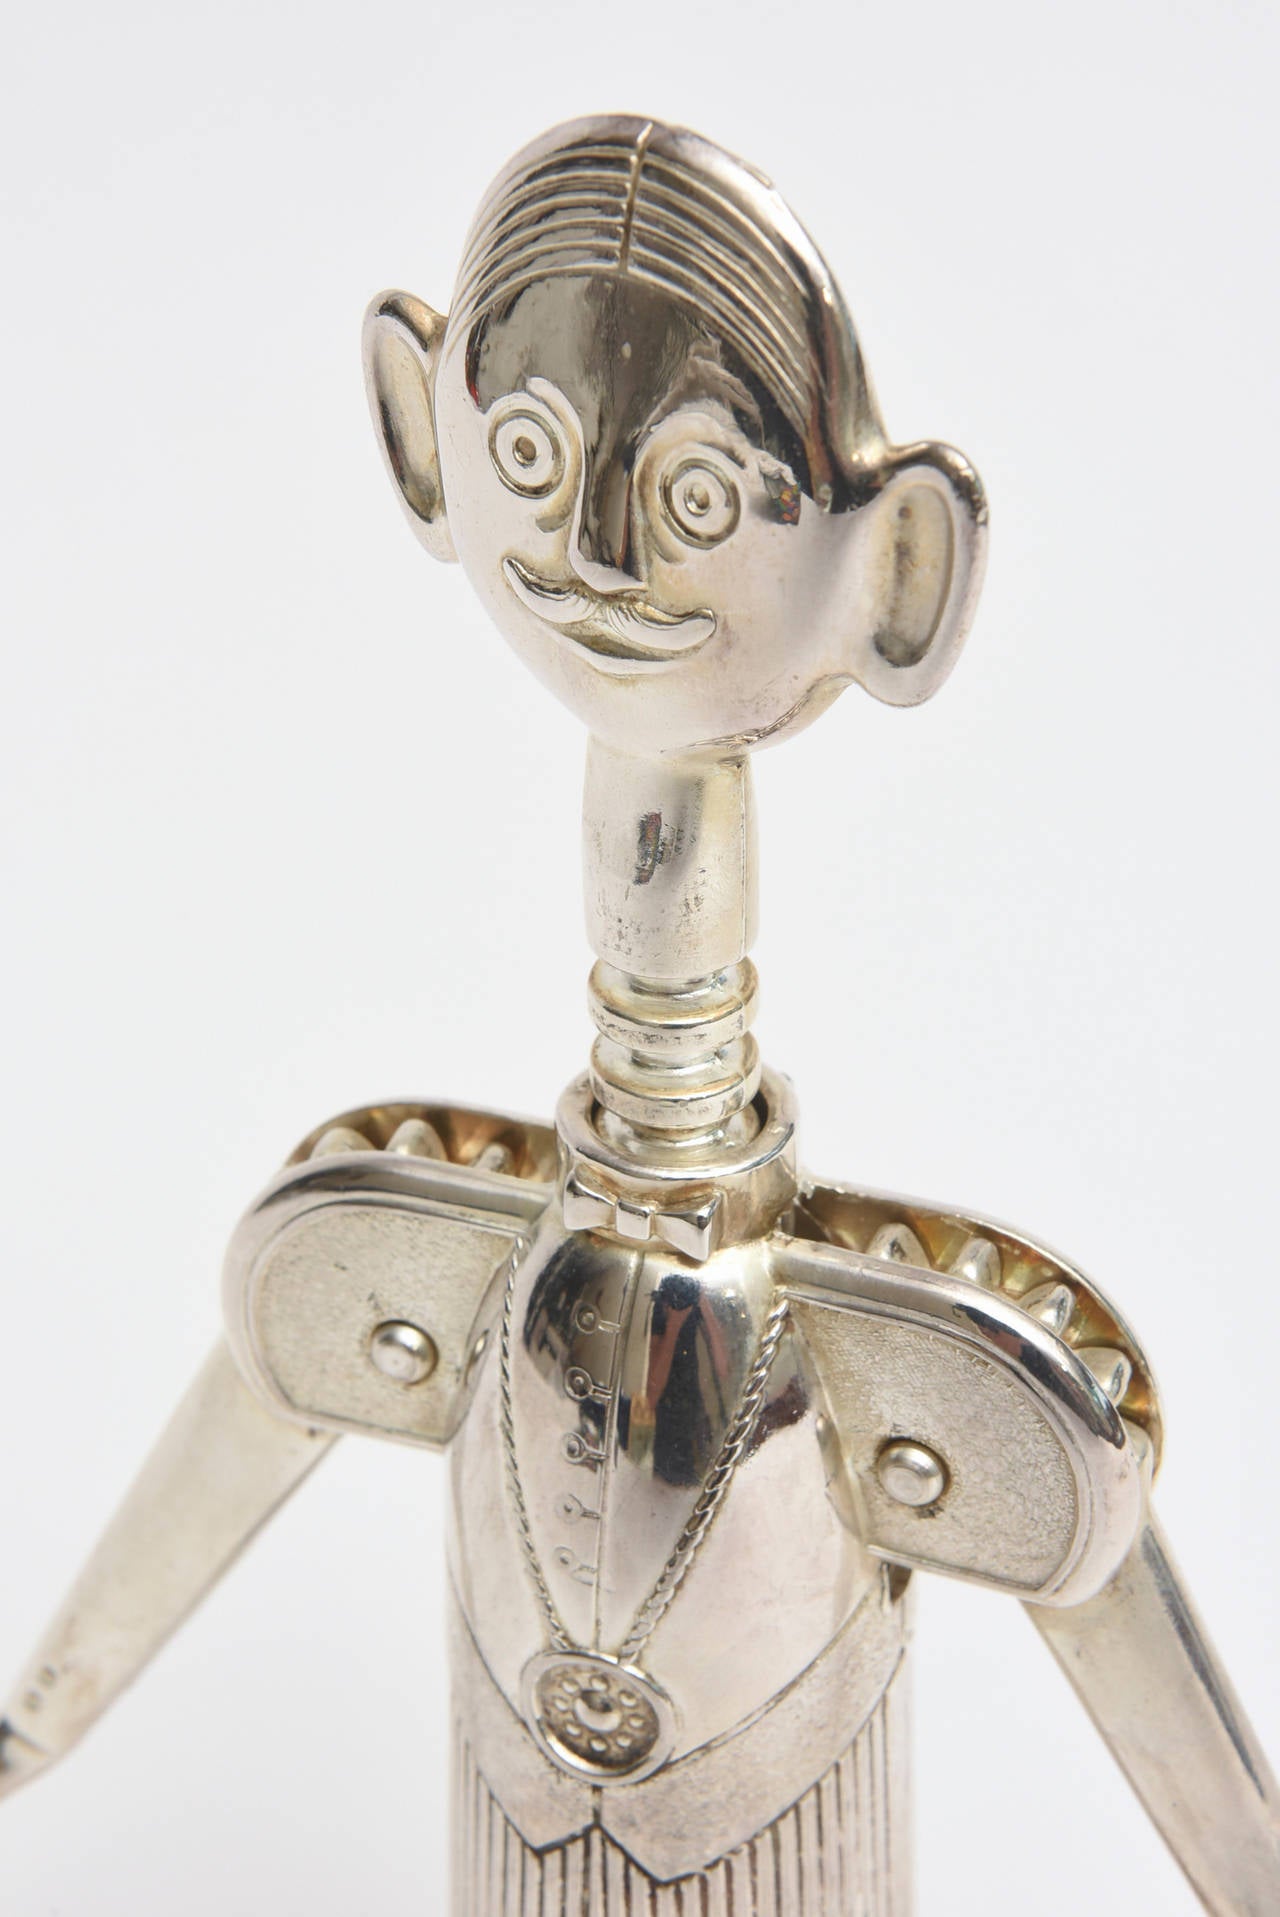 This lovely and vintage Italian wine opener has great weight to it.
It is the image we believe of a sommelier.
It will stand up on it's own on a bar!
Delightful and charming!